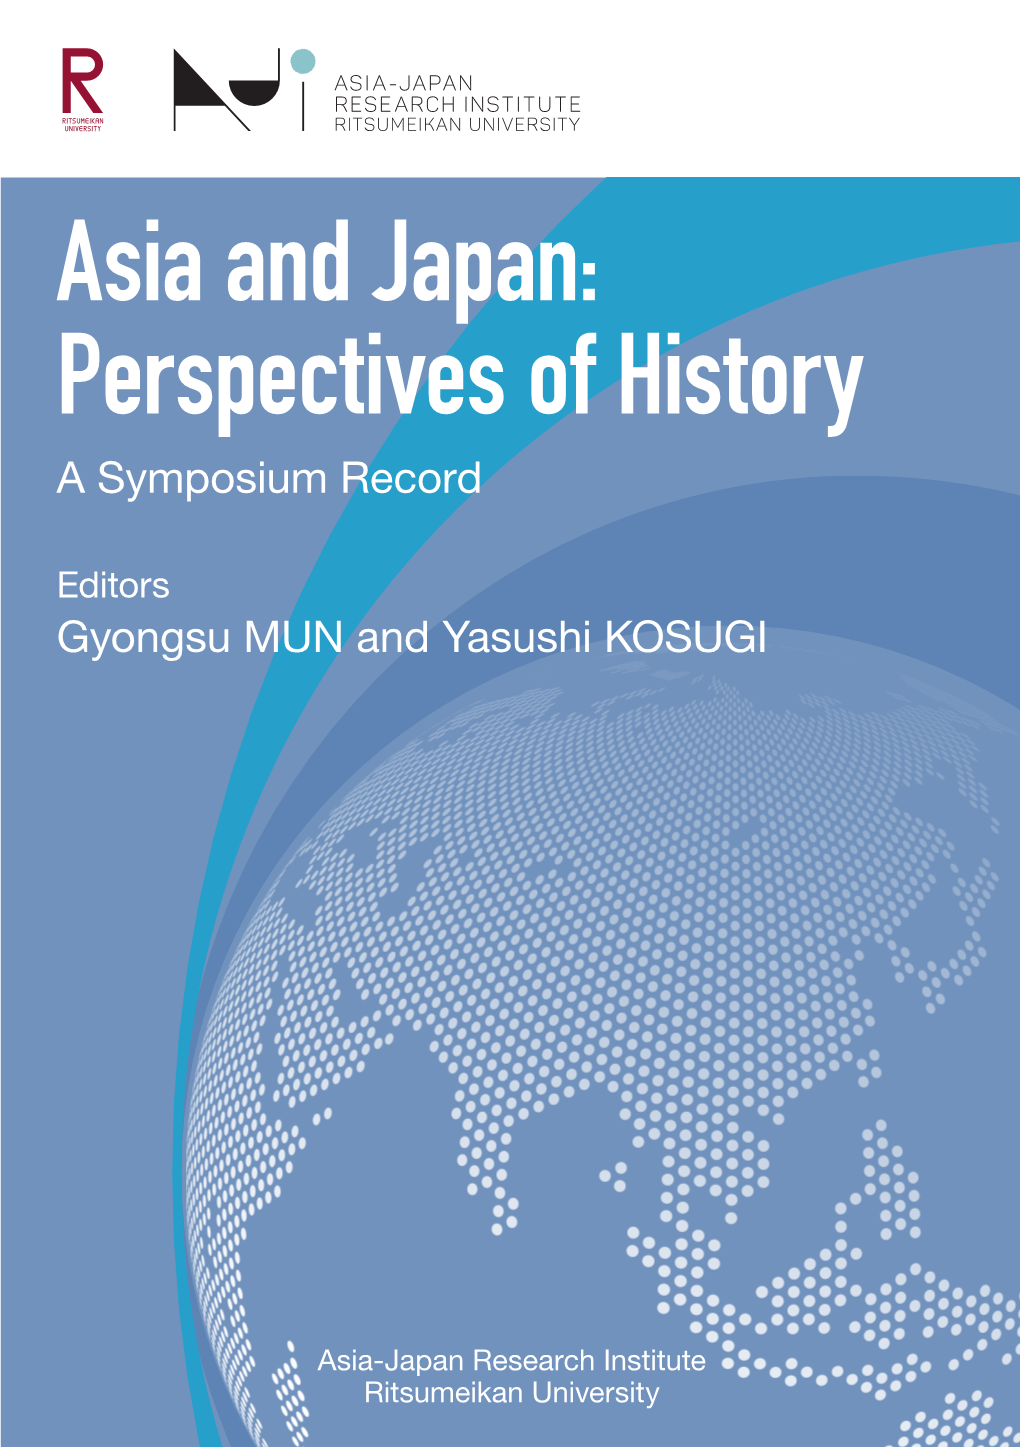 Asia and Japan: Perspectives of History a Symposium Record